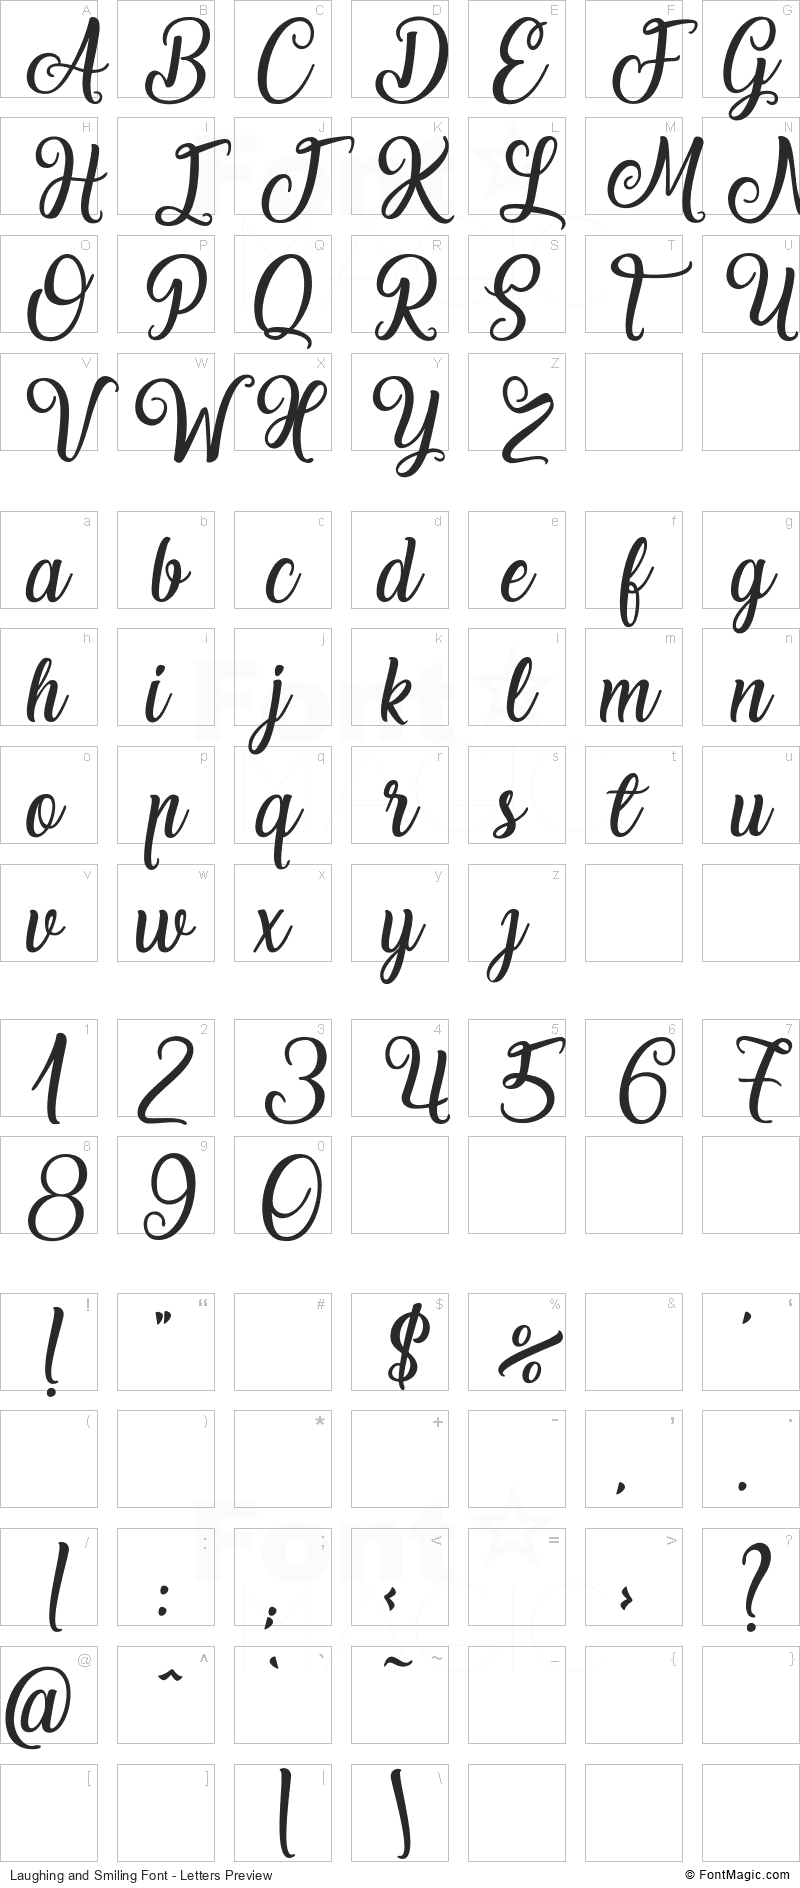 Laughing and Smiling Font - All Latters Preview Chart